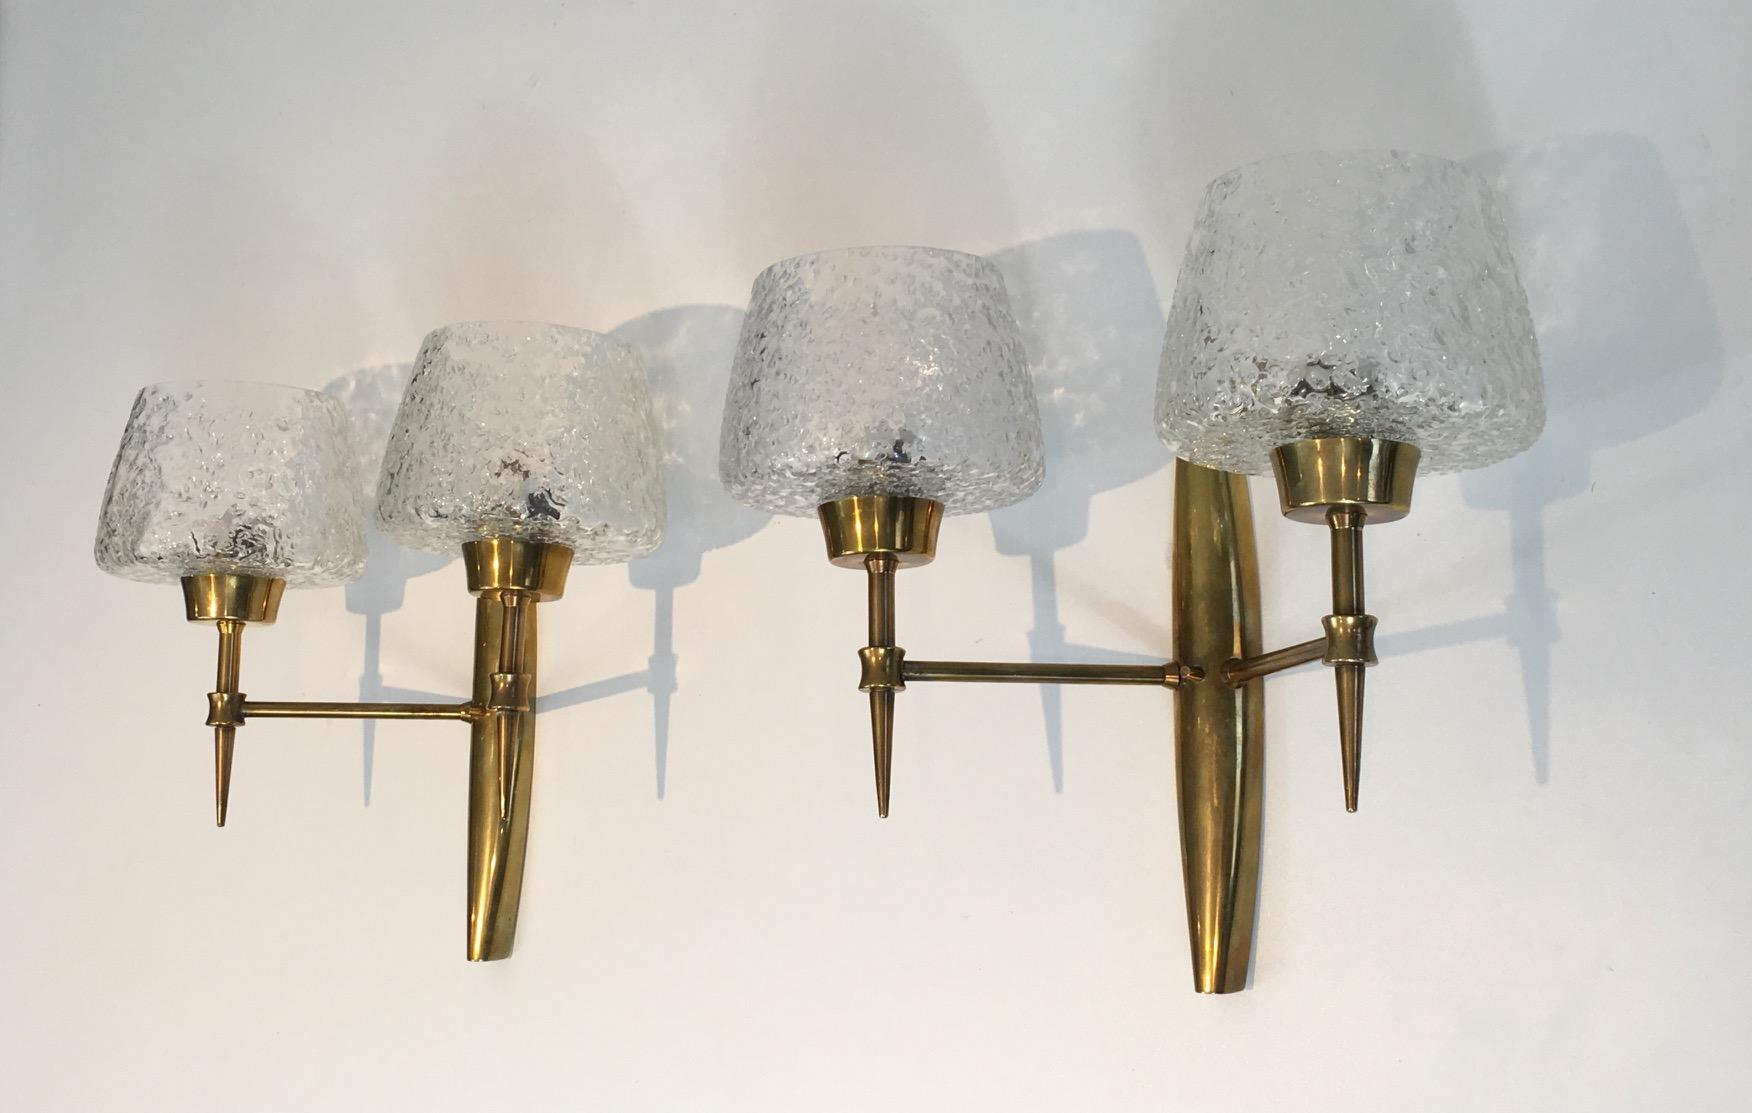 This rare and fine pair of mid-modern wall lights is made of bronze with beautiful worked glass reflectors. The quality of these sconces is really good. They are Italian in the style of Stilnovo. Circa 1960